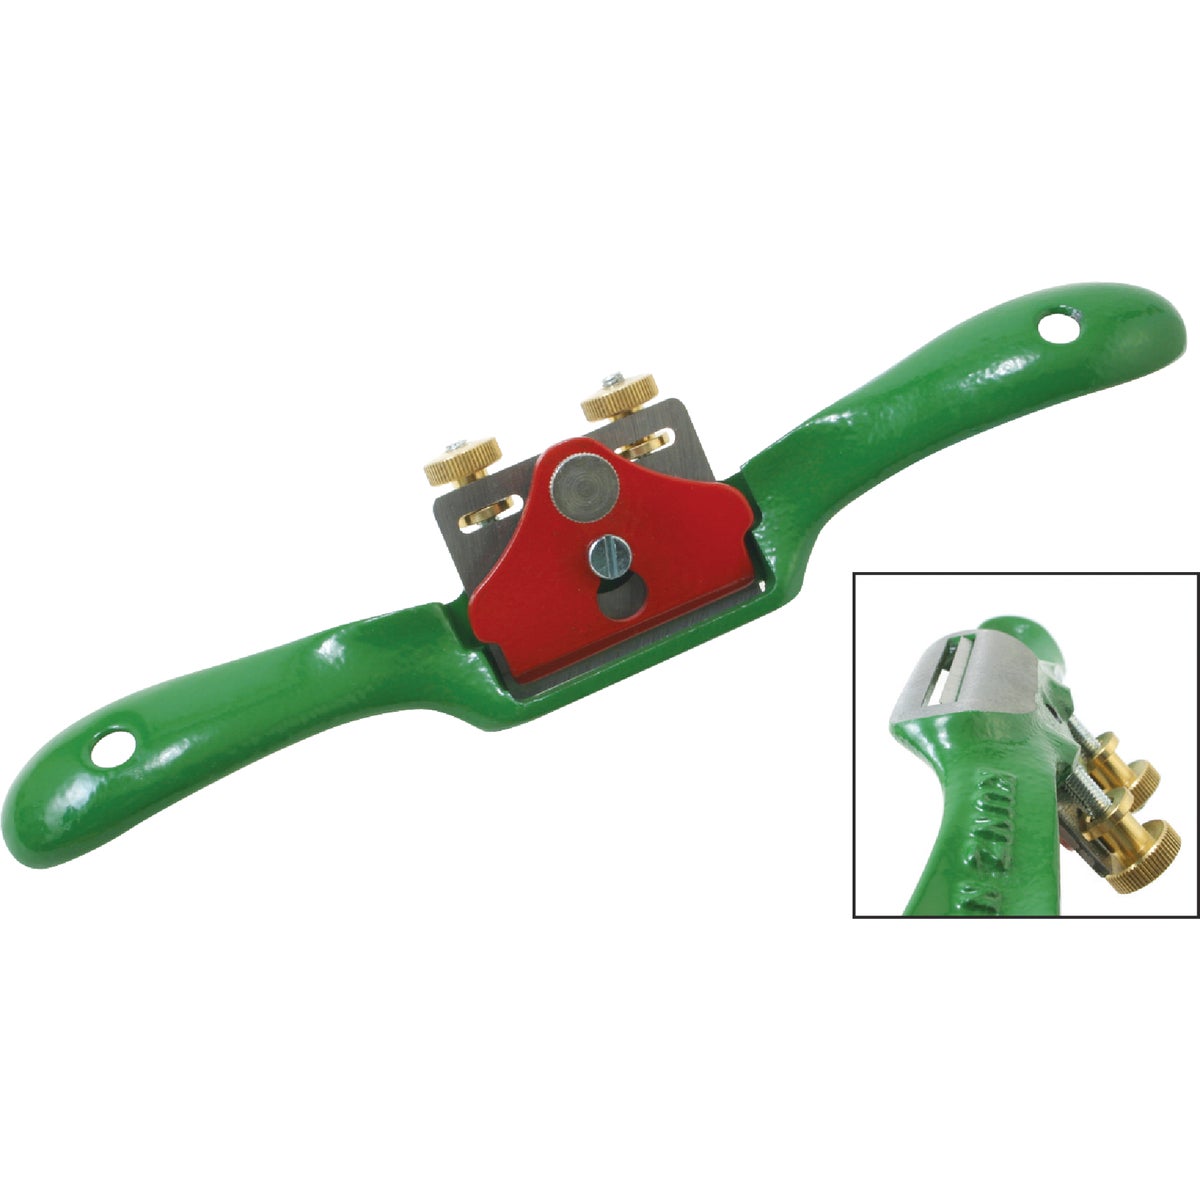 Item 315698, This is an all-around spokeshave that all woodworkers should have in their 